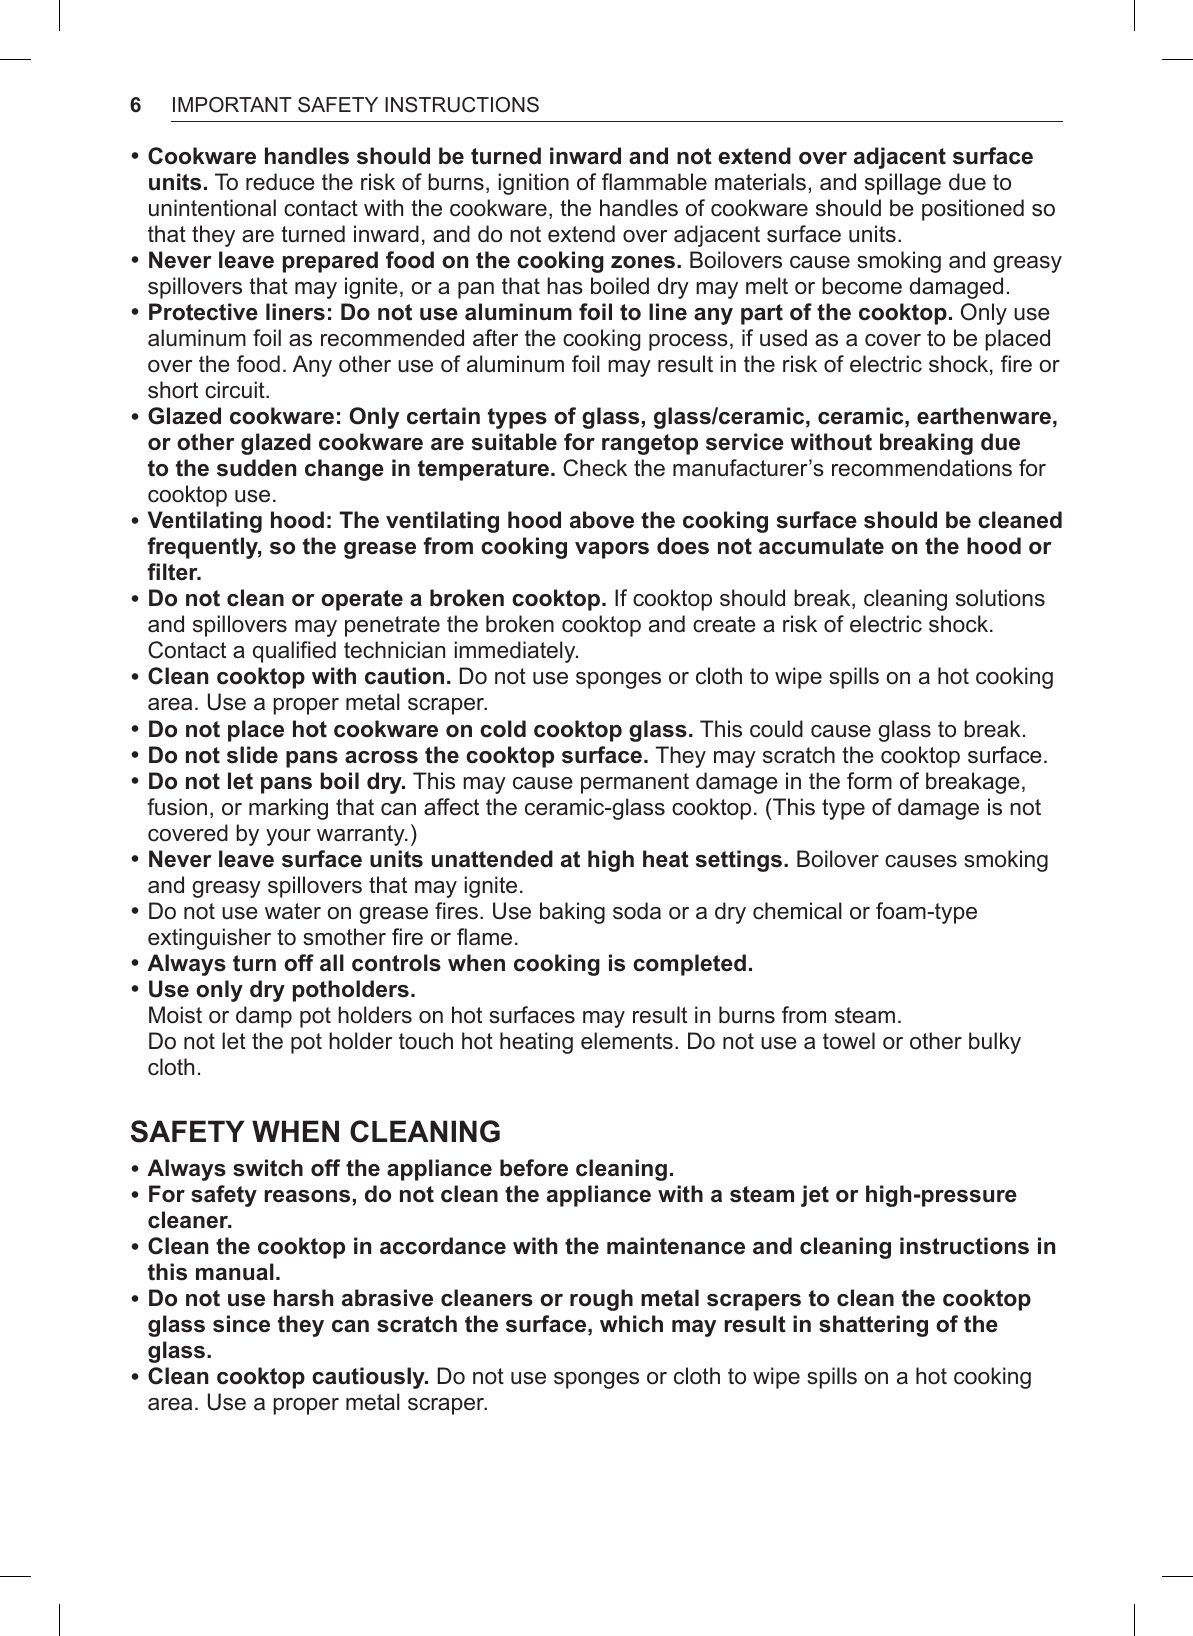 6IMPORTANT SAFETY INSTRUCTIONS •Cookware handles should be turned inward and not extend over adjacent surface units. To reduce the risk of burns, ignition of flammable materials, and spillage due to unintentional contact with the cookware, the handles of cookware should be positioned so that they are turned inward, and do not extend over adjacent surface units. •Never leave prepared food on the cooking zones. Boilovers cause smoking and greasy spillovers that may ignite, or a pan that has boiled dry may melt or become damaged. •Protective liners: Do not use aluminum foil to line any part of the cooktop. Only use aluminum foil as recommended after the cooking process, if used as a cover to be placed over the food. Any other use of aluminum foil may result in the risk of electric shock, fire or short circuit. •Glazed cookware: Only certain types of glass, glass/ceramic, ceramic, earthenware, or other glazed cookware are suitable for rangetop service without breaking due to the sudden change in temperature. Check the manufacturer’s recommendations for cooktop use. •Ventilating hood: The ventilating hood above the cooking surface should be cleaned frequently, so the grease from cooking vapors does not accumulate on the hood or filter. •Do not clean or operate a broken cooktop. If cooktop should break, cleaning solutions and spillovers may penetrate the broken cooktop and create a risk of electric shock. Contact a qualified technician immediately. •Clean cooktop with caution. Do not use sponges or cloth to wipe spills on a hot cooking area. Use a proper metal scraper. •Do not place hot cookware on cold cooktop glass. This could cause glass to break. •Do not slide pans across the cooktop surface. They may scratch the cooktop surface. •Do not let pans boil dry. This may cause permanent damage in the form of breakage, fusion, or marking that can affect the ceramic-glass cooktop. (This type of damage is not covered by your warranty.) •Never leave surface units unattended at high heat settings. Boilover causes smoking and greasy spillovers that may ignite. •Do not use water on grease fires. Use baking soda or a dry chemical or foam-type extinguisher to smother fire or flame. •Always turn off all controls when cooking is completed. •Use only dry potholders. Moist or damp pot holders on hot surfaces may result in burns from steam. Do not let the pot holder touch hot heating elements. Do not use a towel or other bulky cloth. SAFETY WHEN CLEANING •Always switch off the appliance before cleaning. •For safety reasons, do not clean the appliance with a steam jet or high-pressure cleaner. •Clean the cooktop in accordance with the maintenance and cleaning instructions in this manual. •Do not use harsh abrasive cleaners or rough metal scrapers to clean the cooktop glass since they can scratch the surface, which may result in shattering of the glass. •Clean cooktop cautiously. Do not use sponges or cloth to wipe spills on a hot cooking area. Use a proper metal scraper.